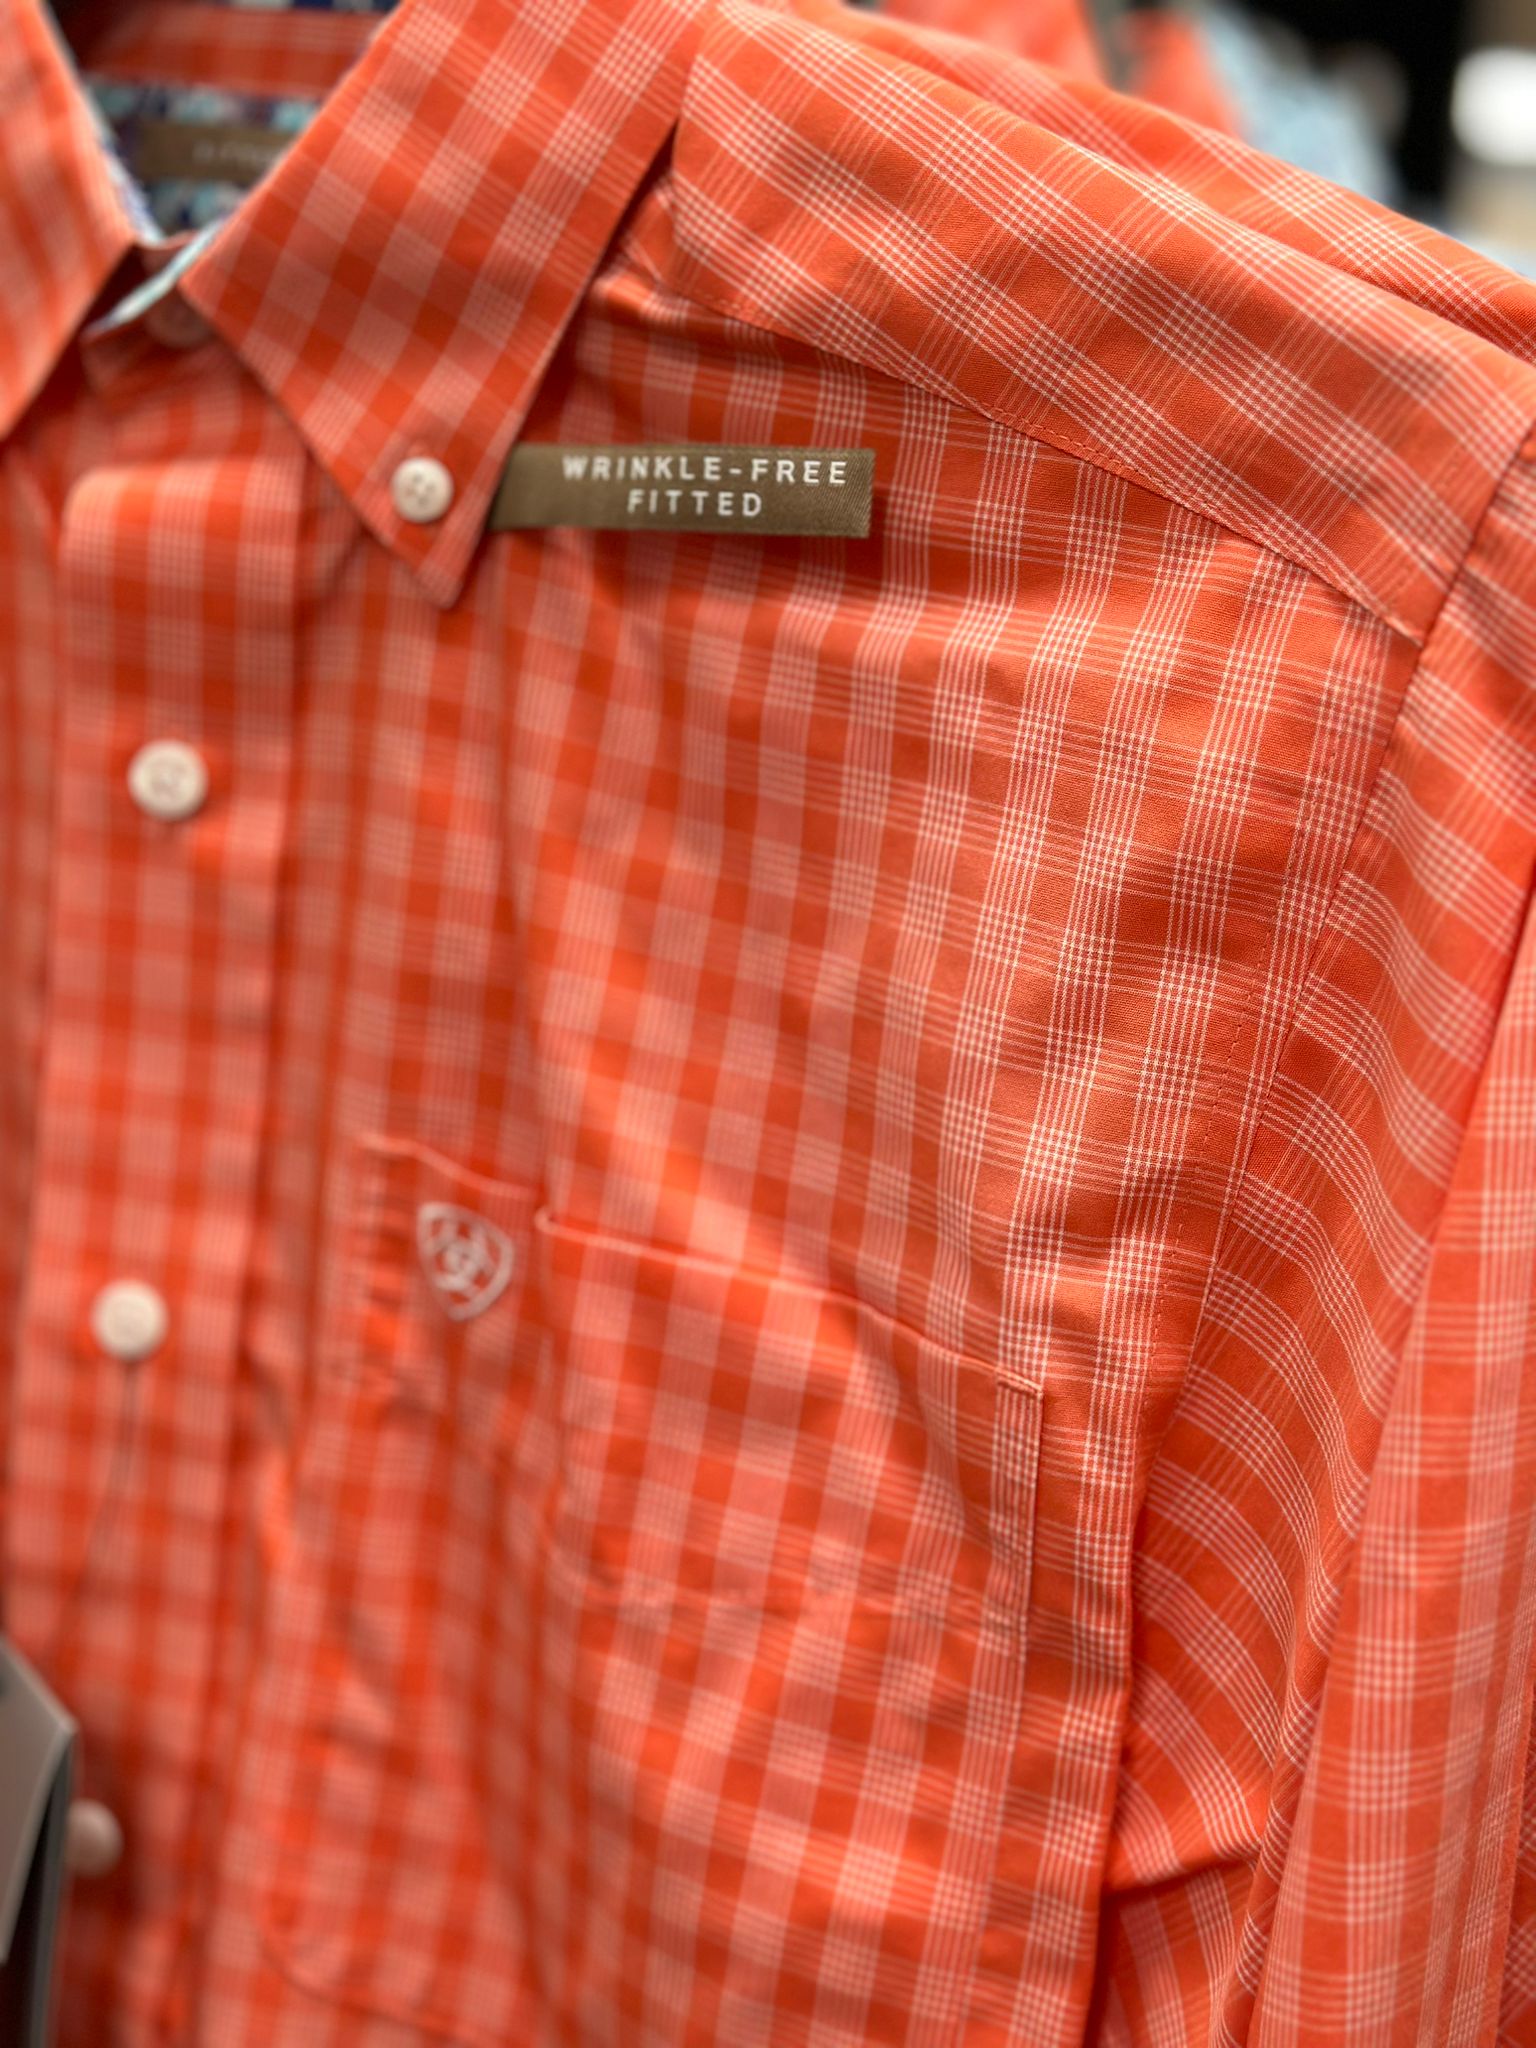 Ariat shirt fitted flame coral